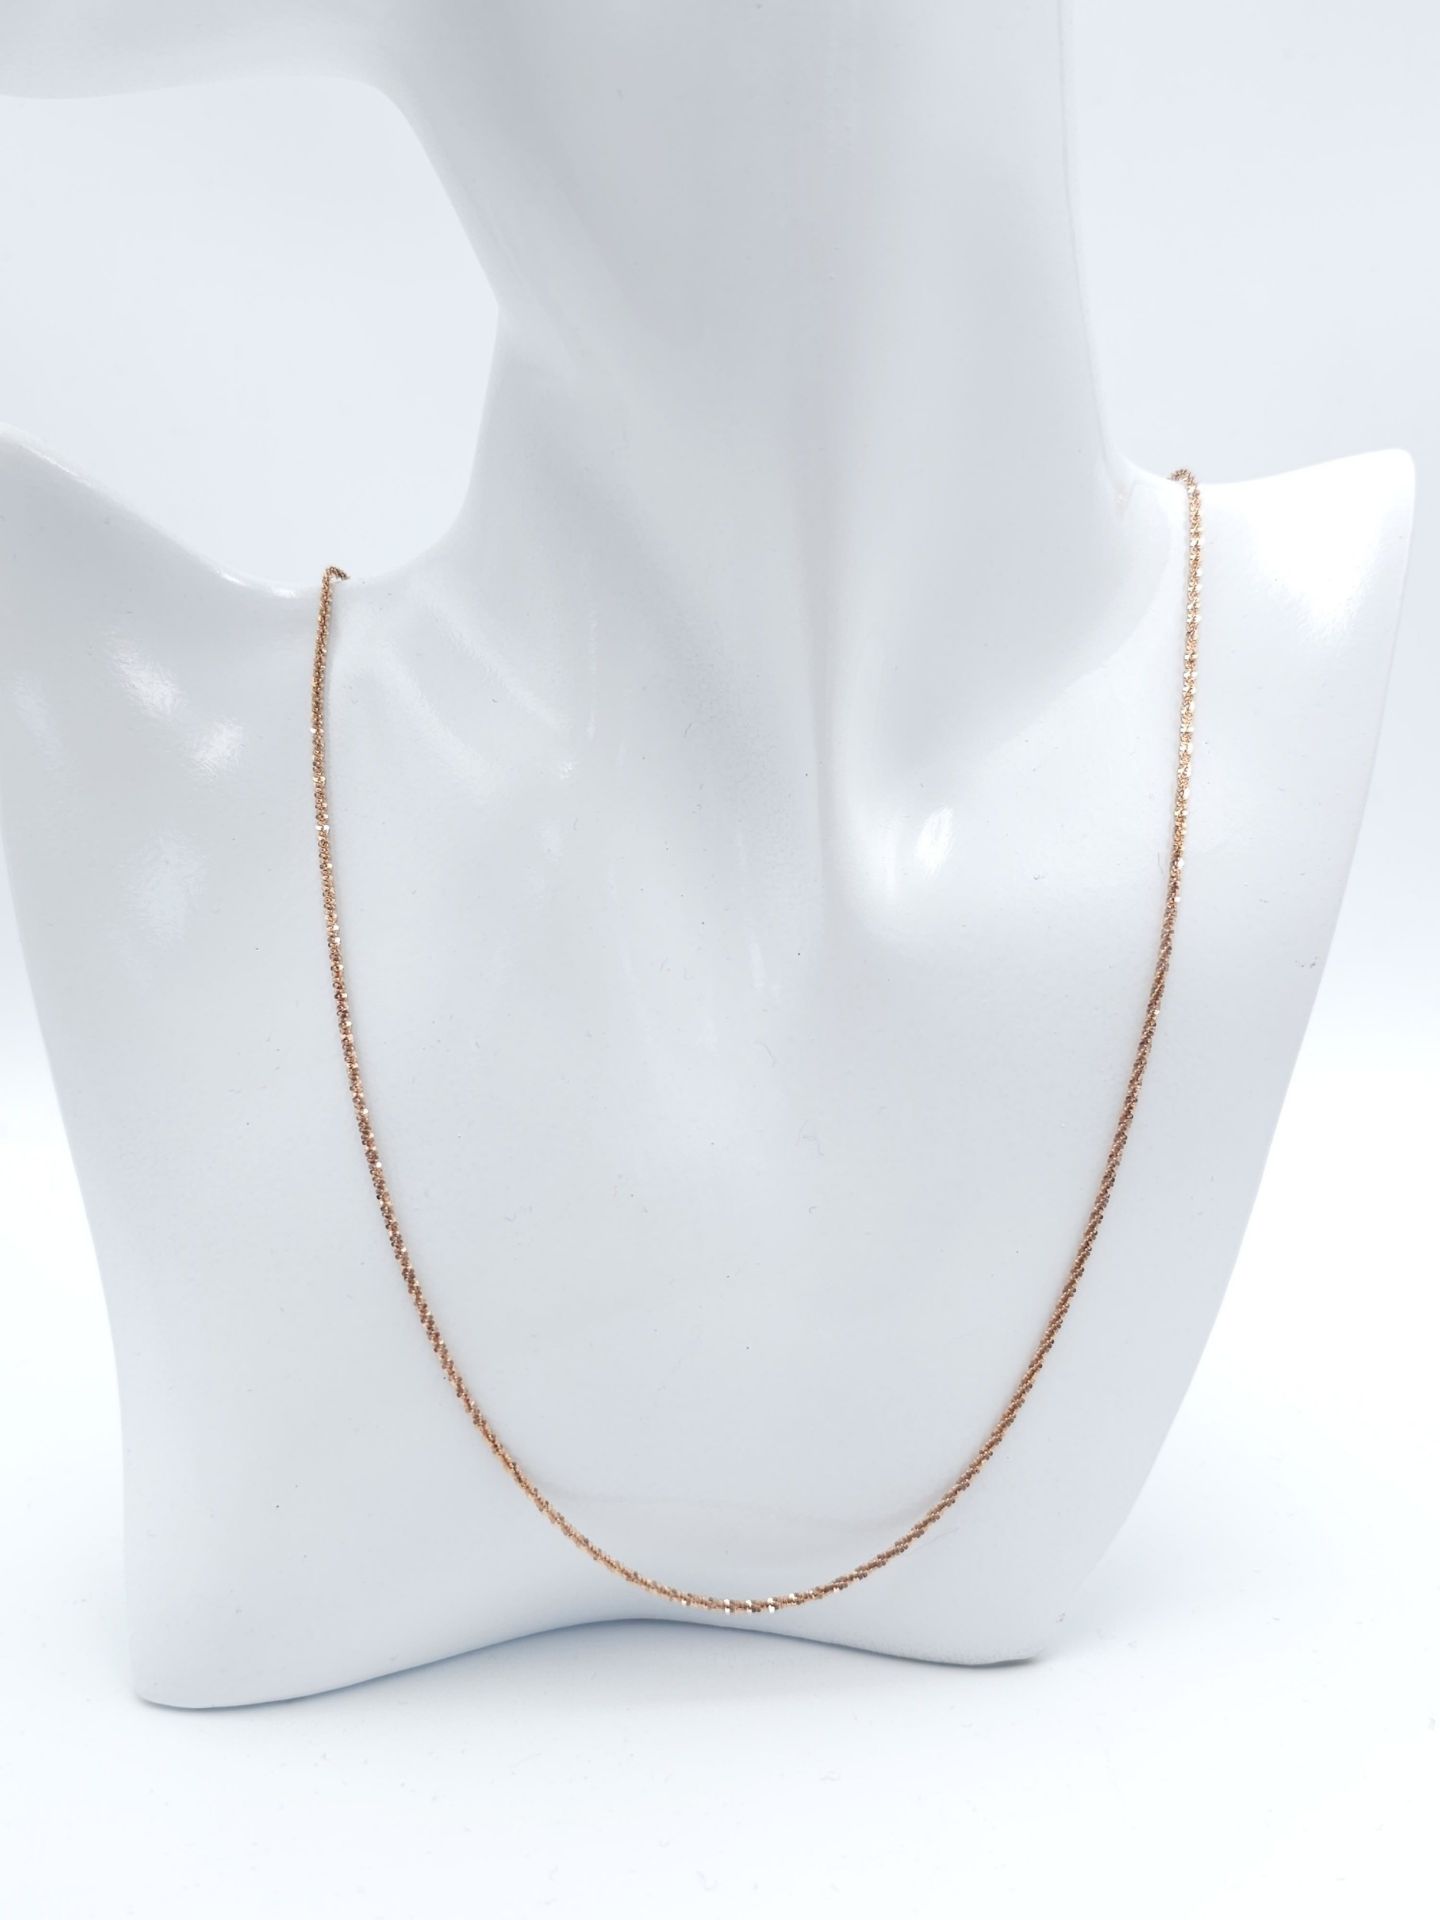 A Parcel of 4 x 60cm Length Unworn Rose Gold-Toned Sterling Silver Chain Necklaces. Comprising 3 x - Image 8 of 21